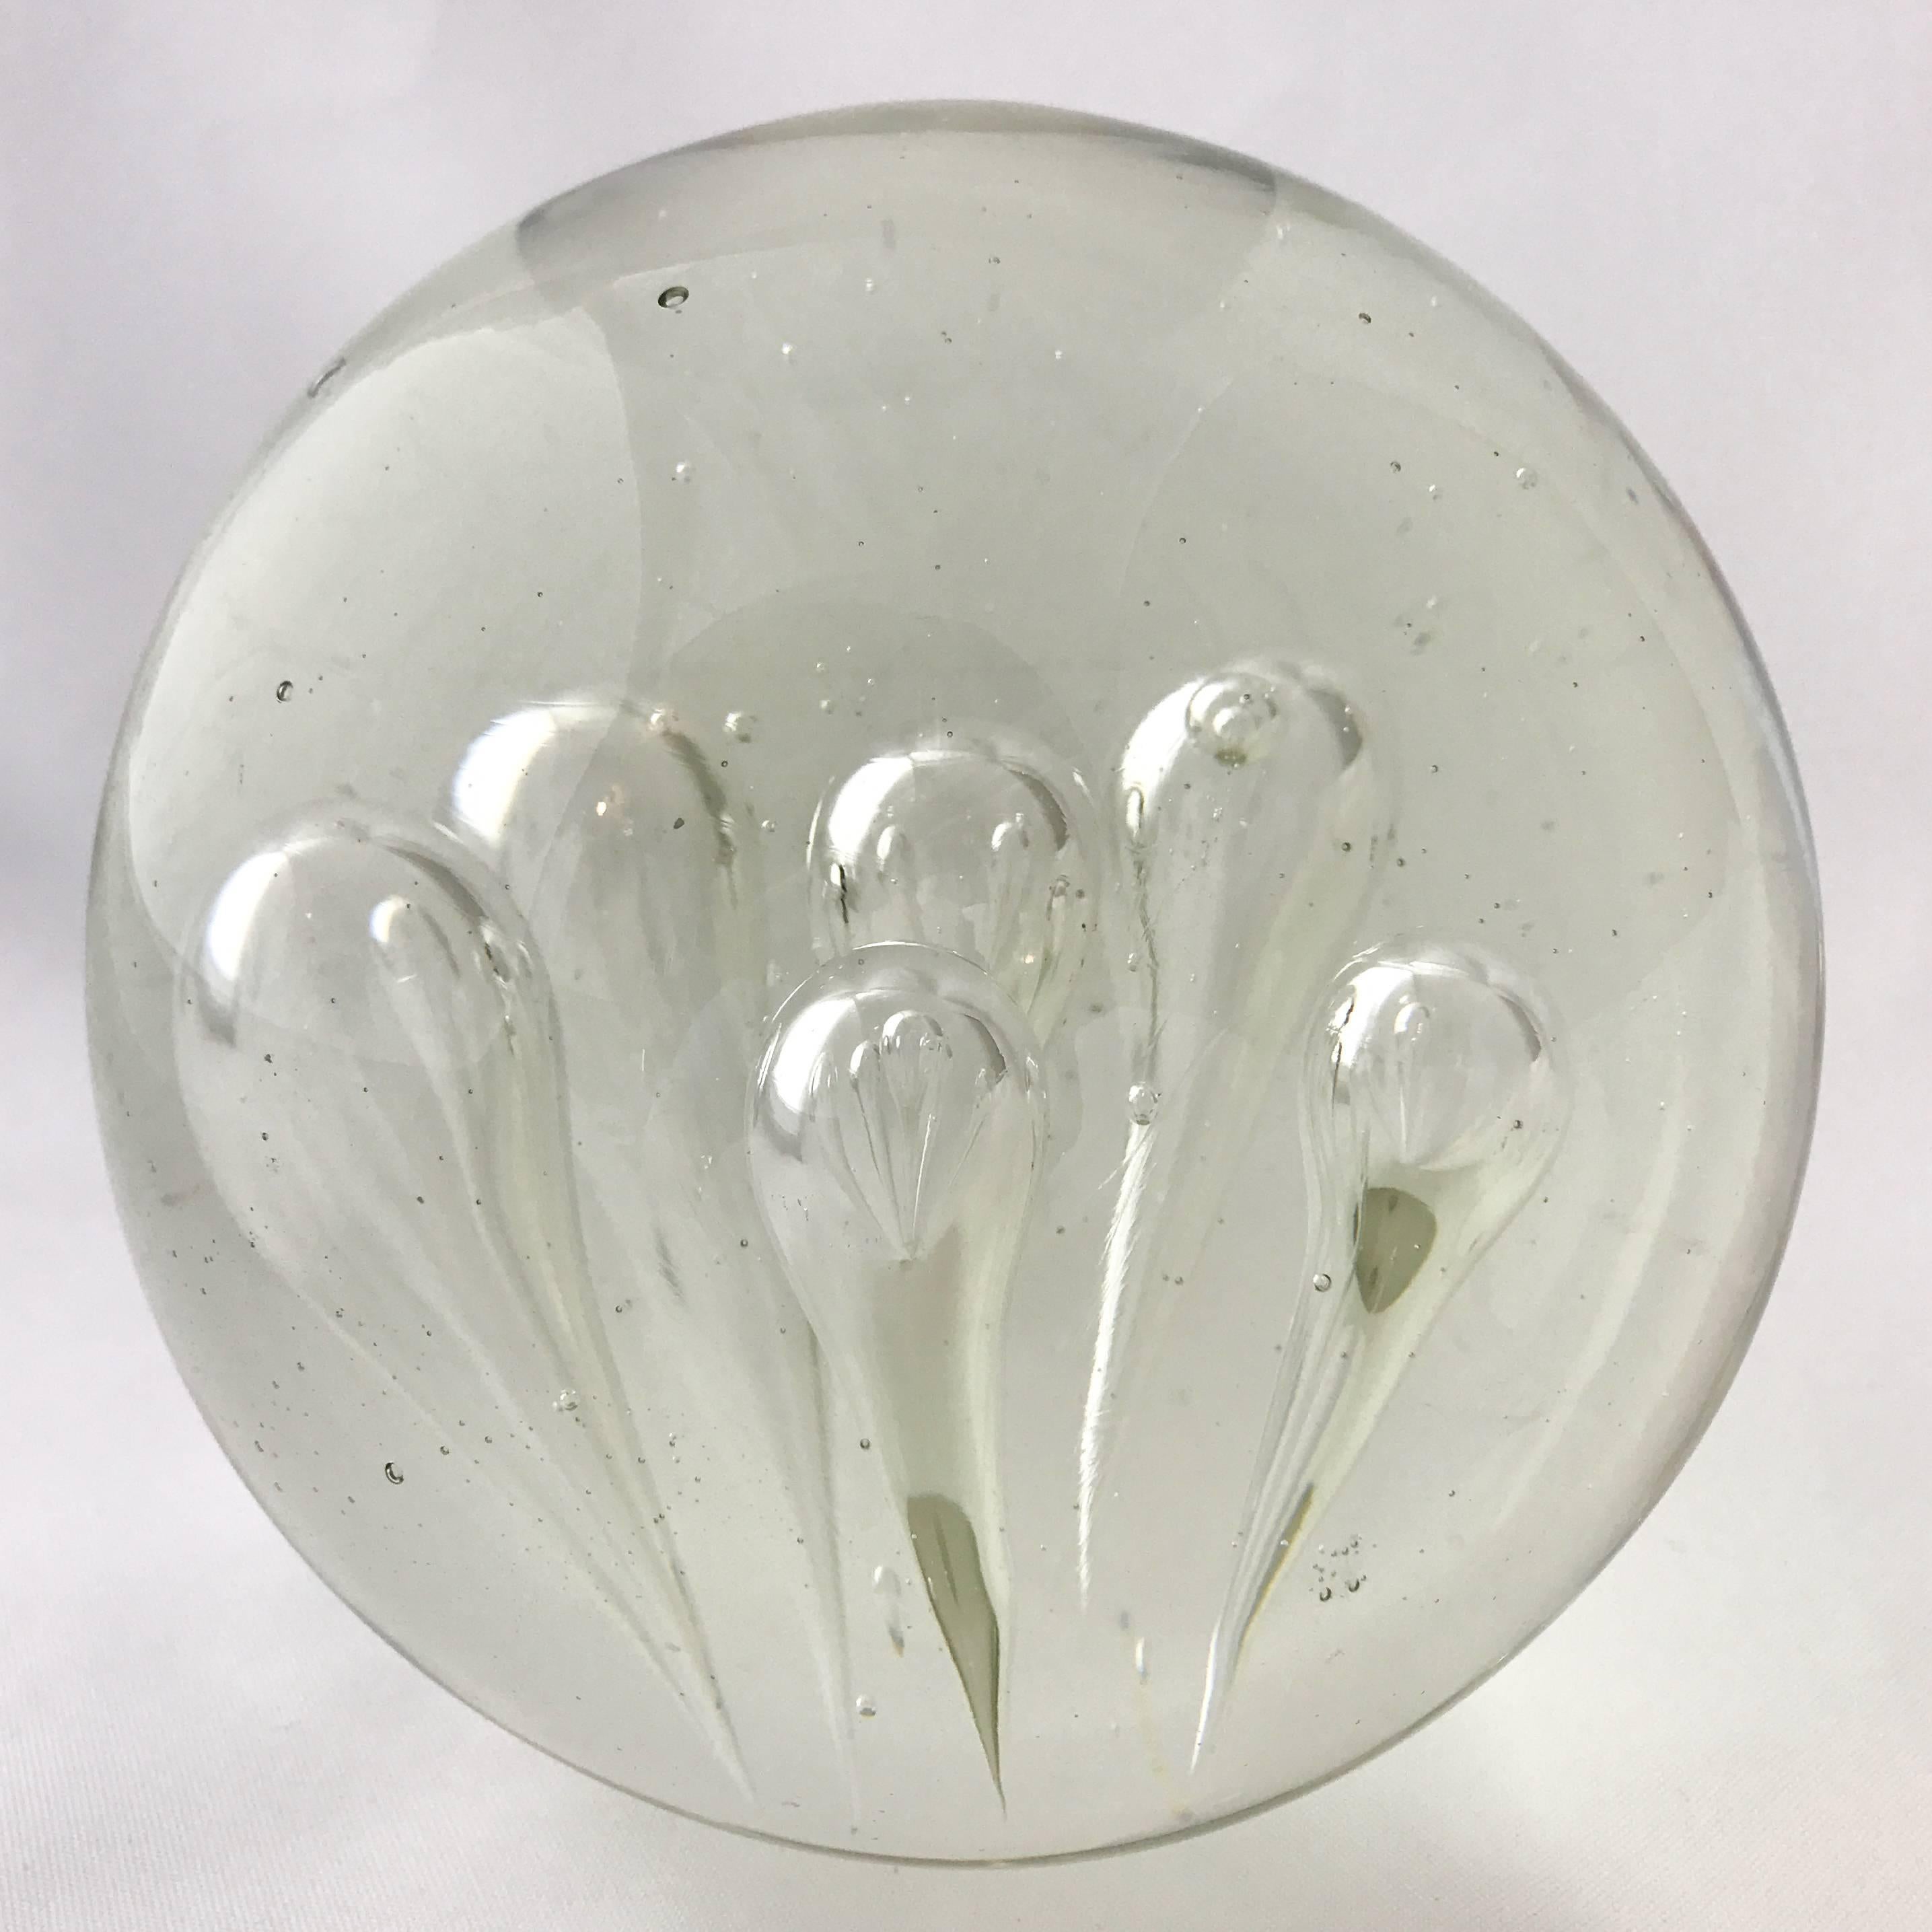 Italian Extra Large Murano Glass Sphere with Six Tapered Bubbles, circa 1970s